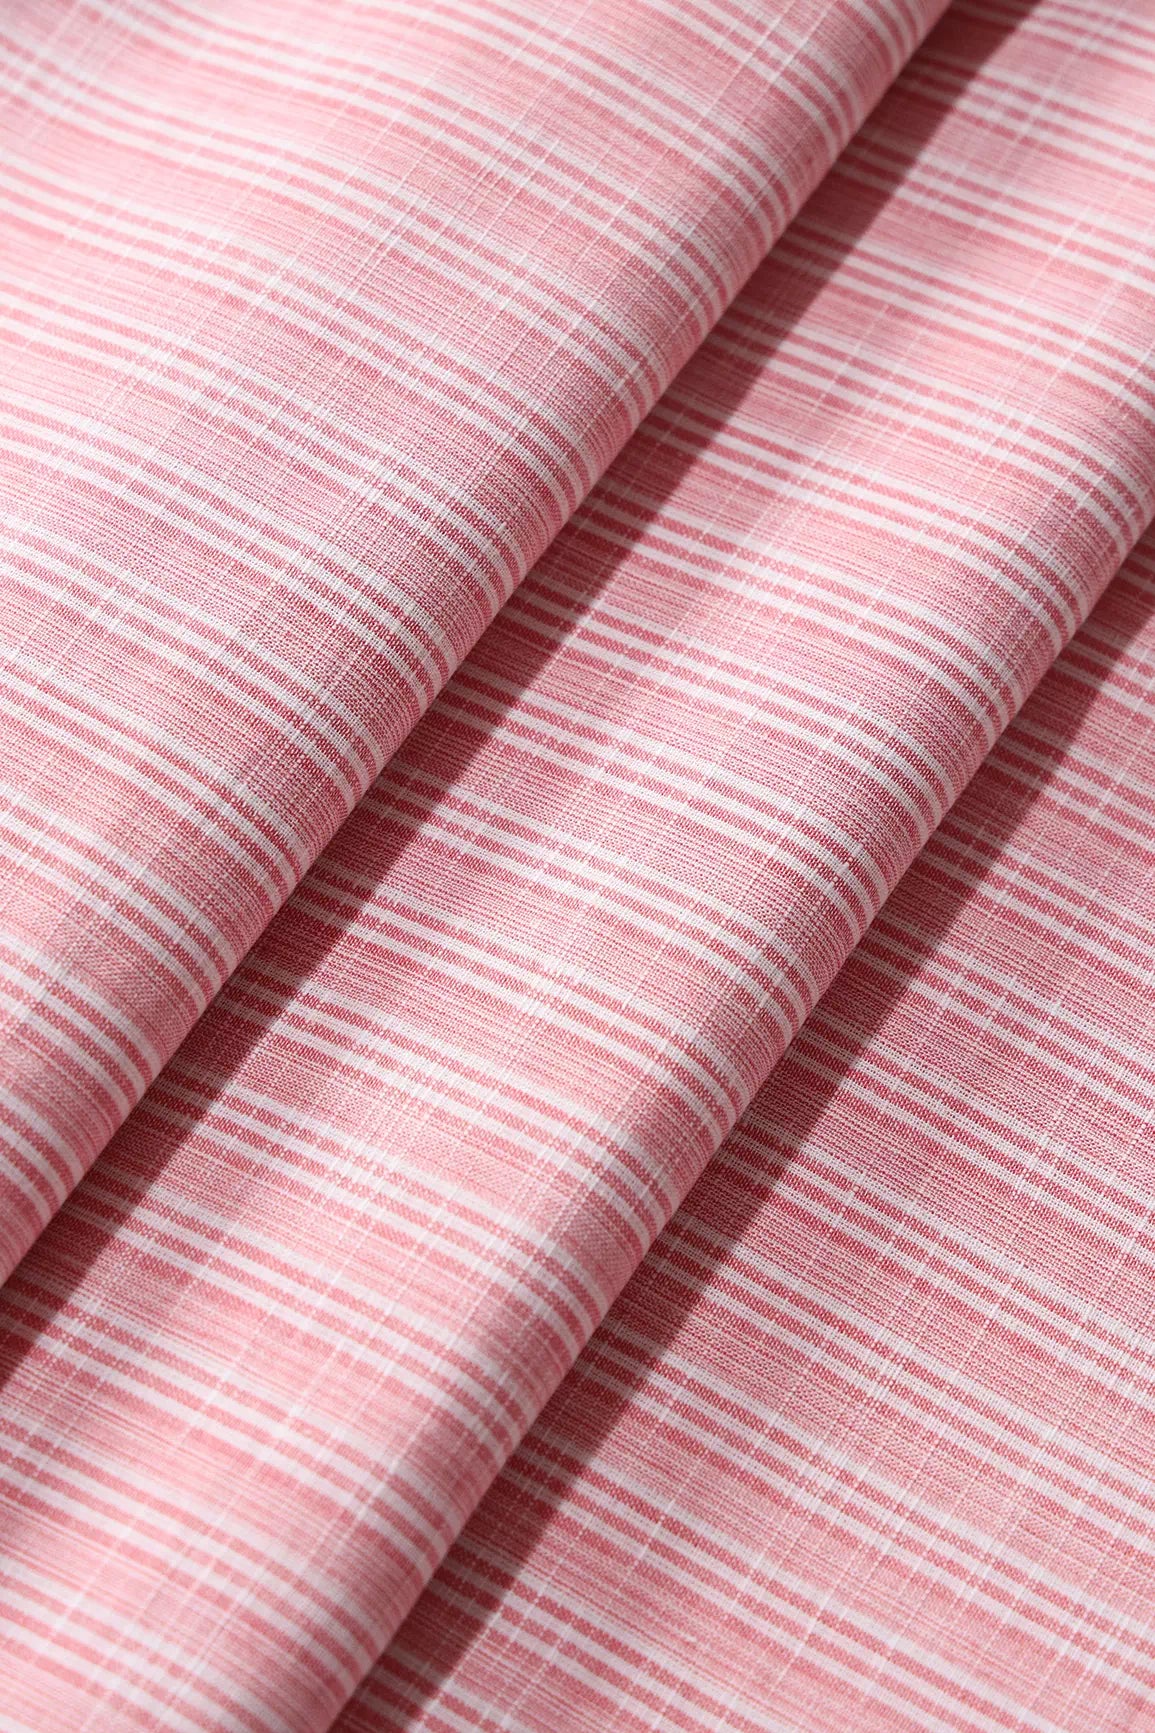 Light Pink And White Stripes Pattern Handwoven Organic Cotton Fabric